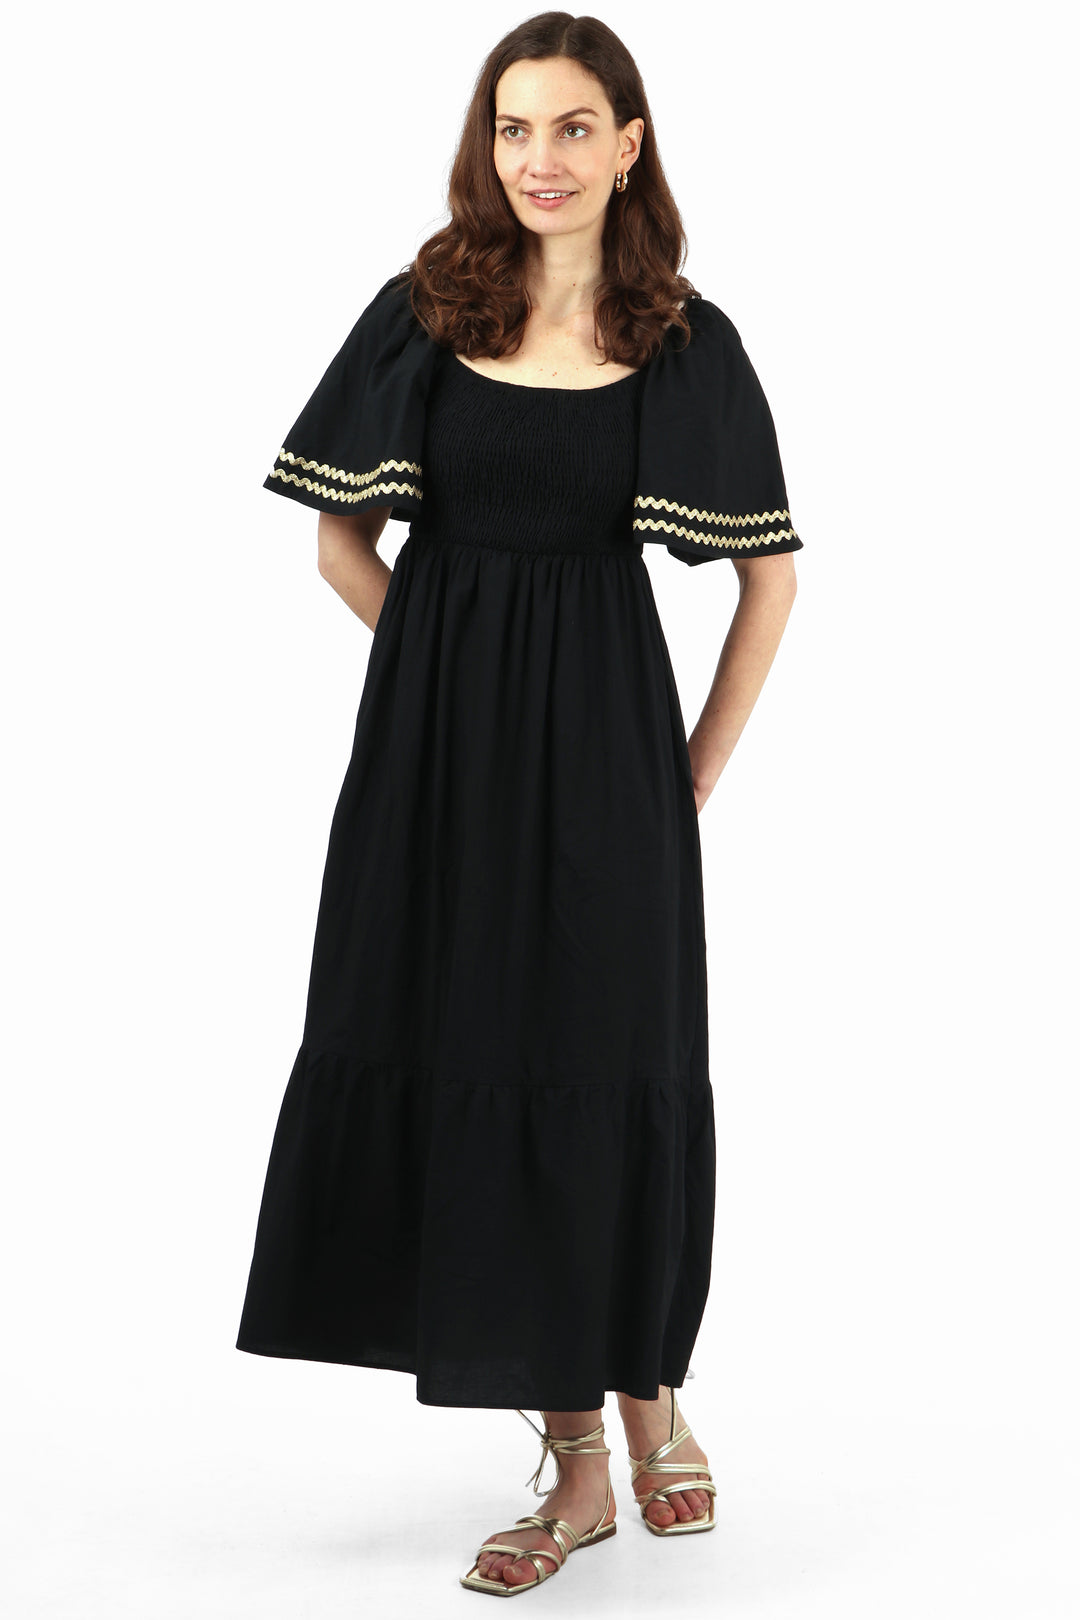 model wearing a maxi milkmaid dress with shirred bodice and short bell sleeves with a gold zig zag stripe trim